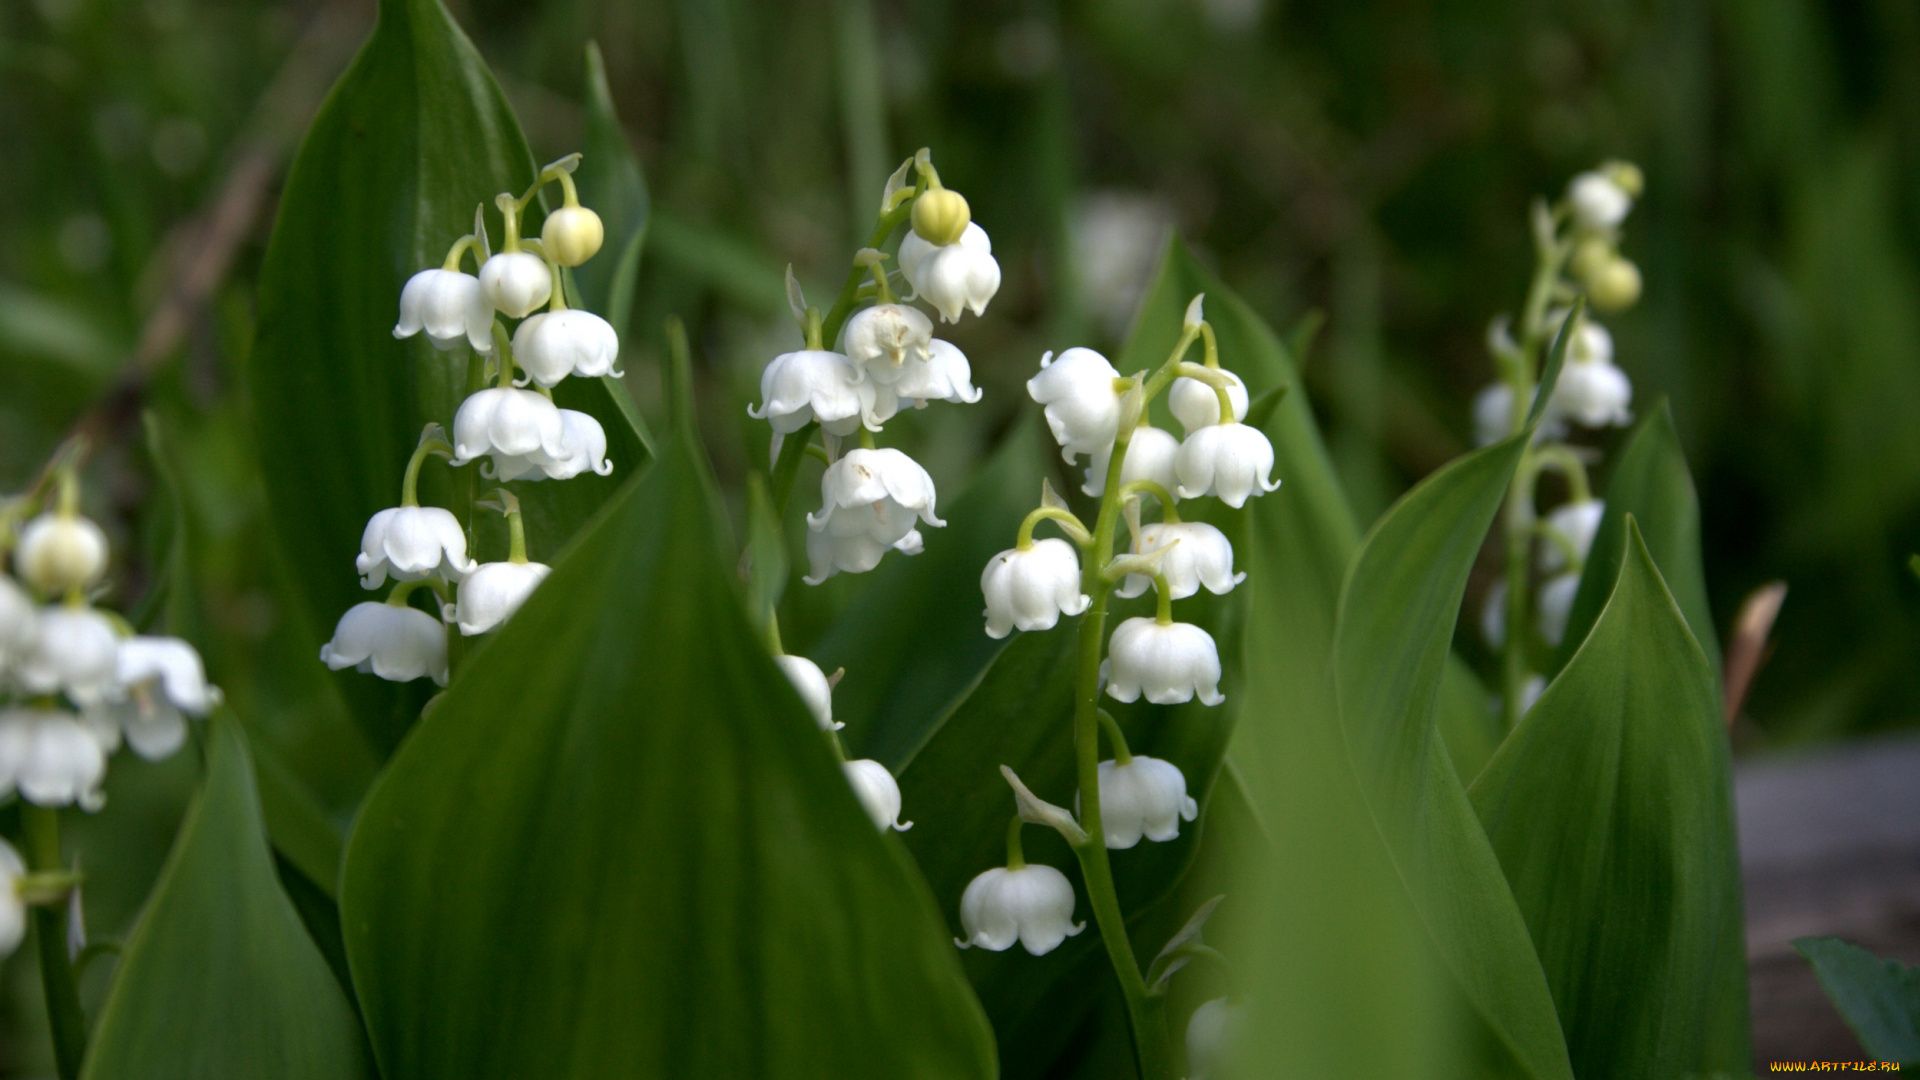 Lily Of The Valley full hd wallpaper for laptop